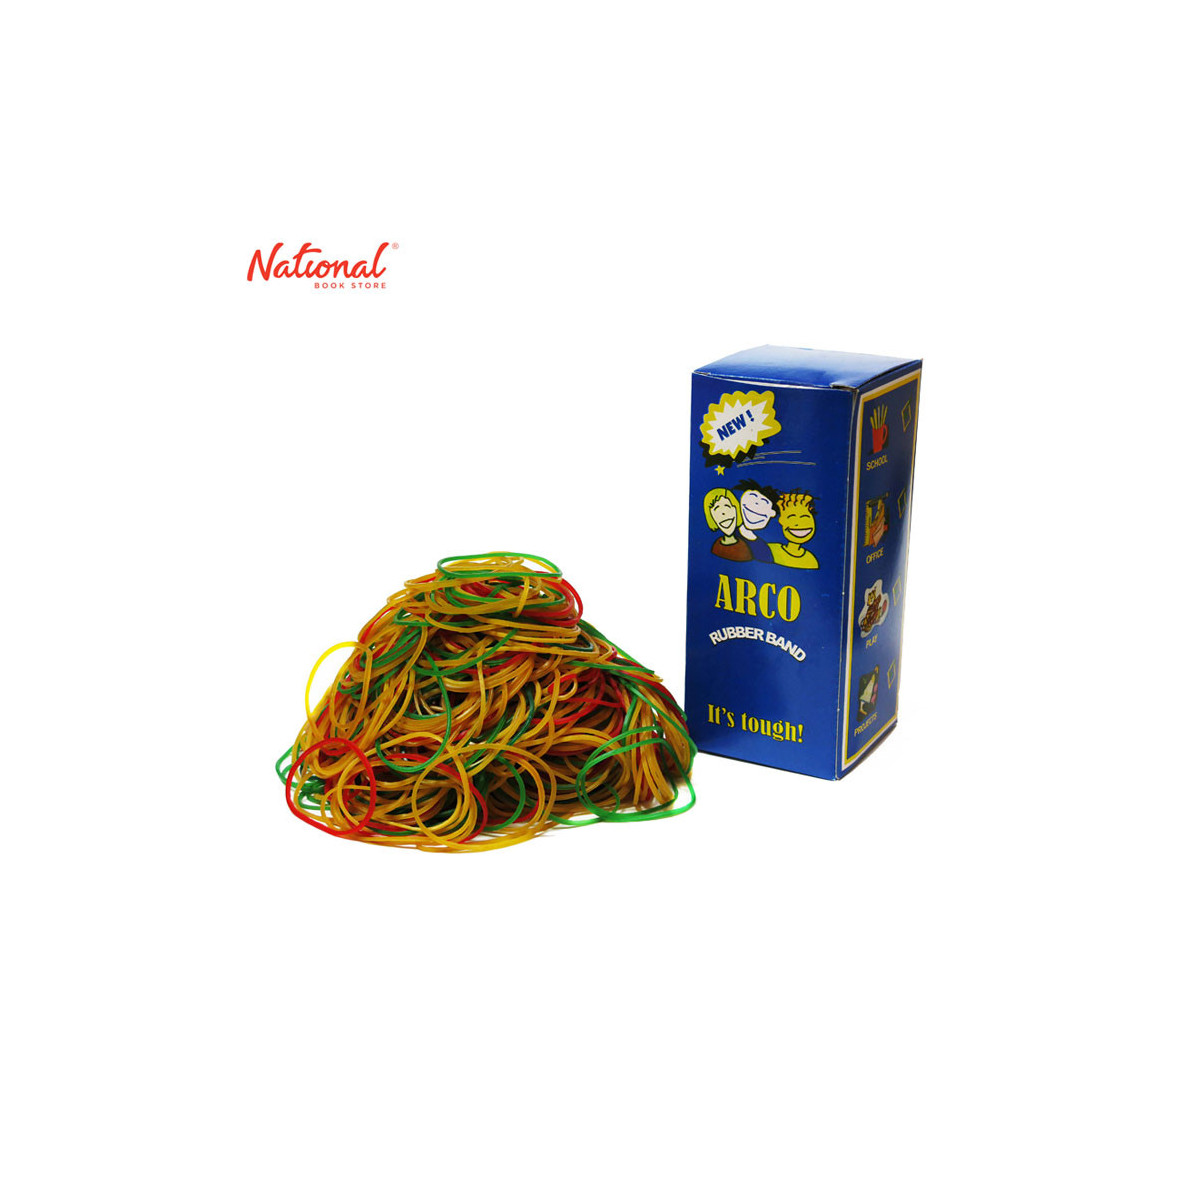 ARCO RUBBERBAND ROUND  350GMS ASSORTED COLOR